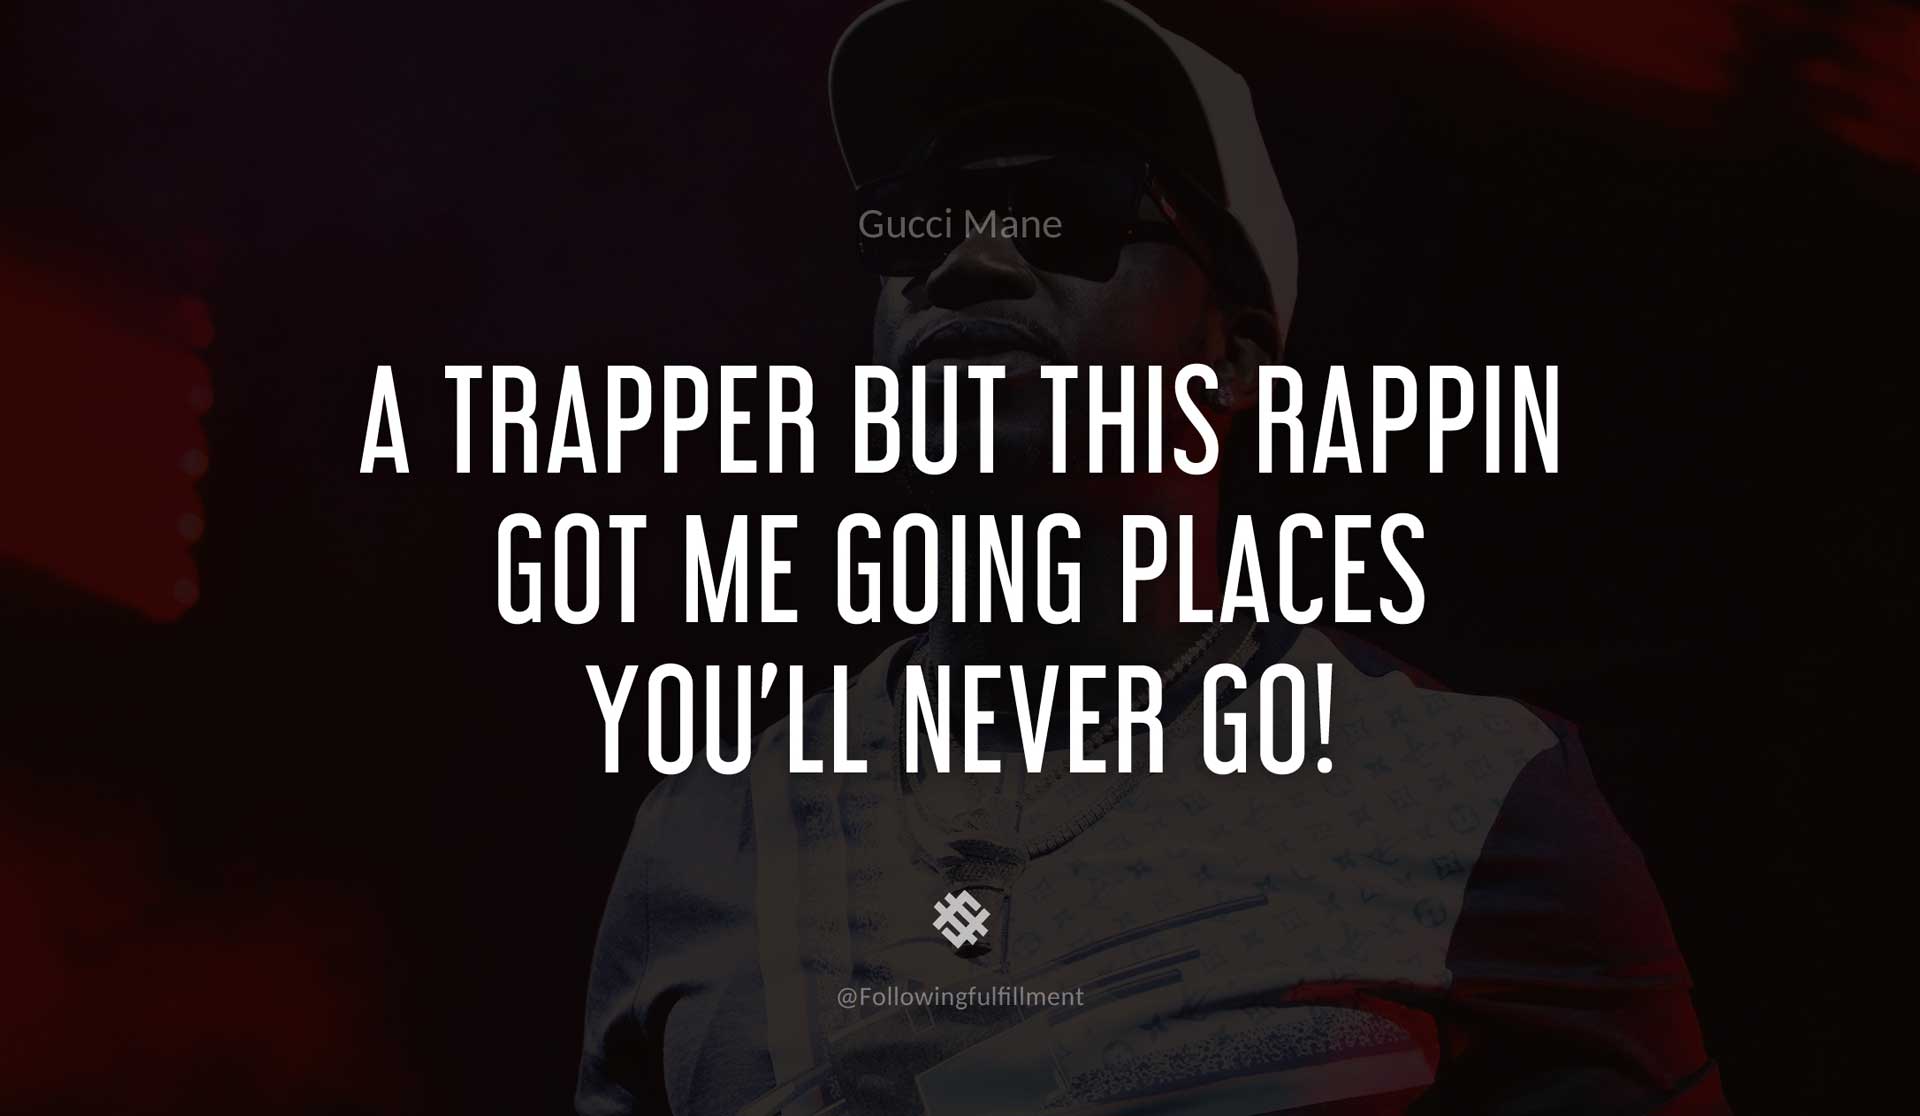 A-trapper-but-this-rappin-got-me-going-places-you'll-never-go!-GUCCI-MANE-Quote.jpg